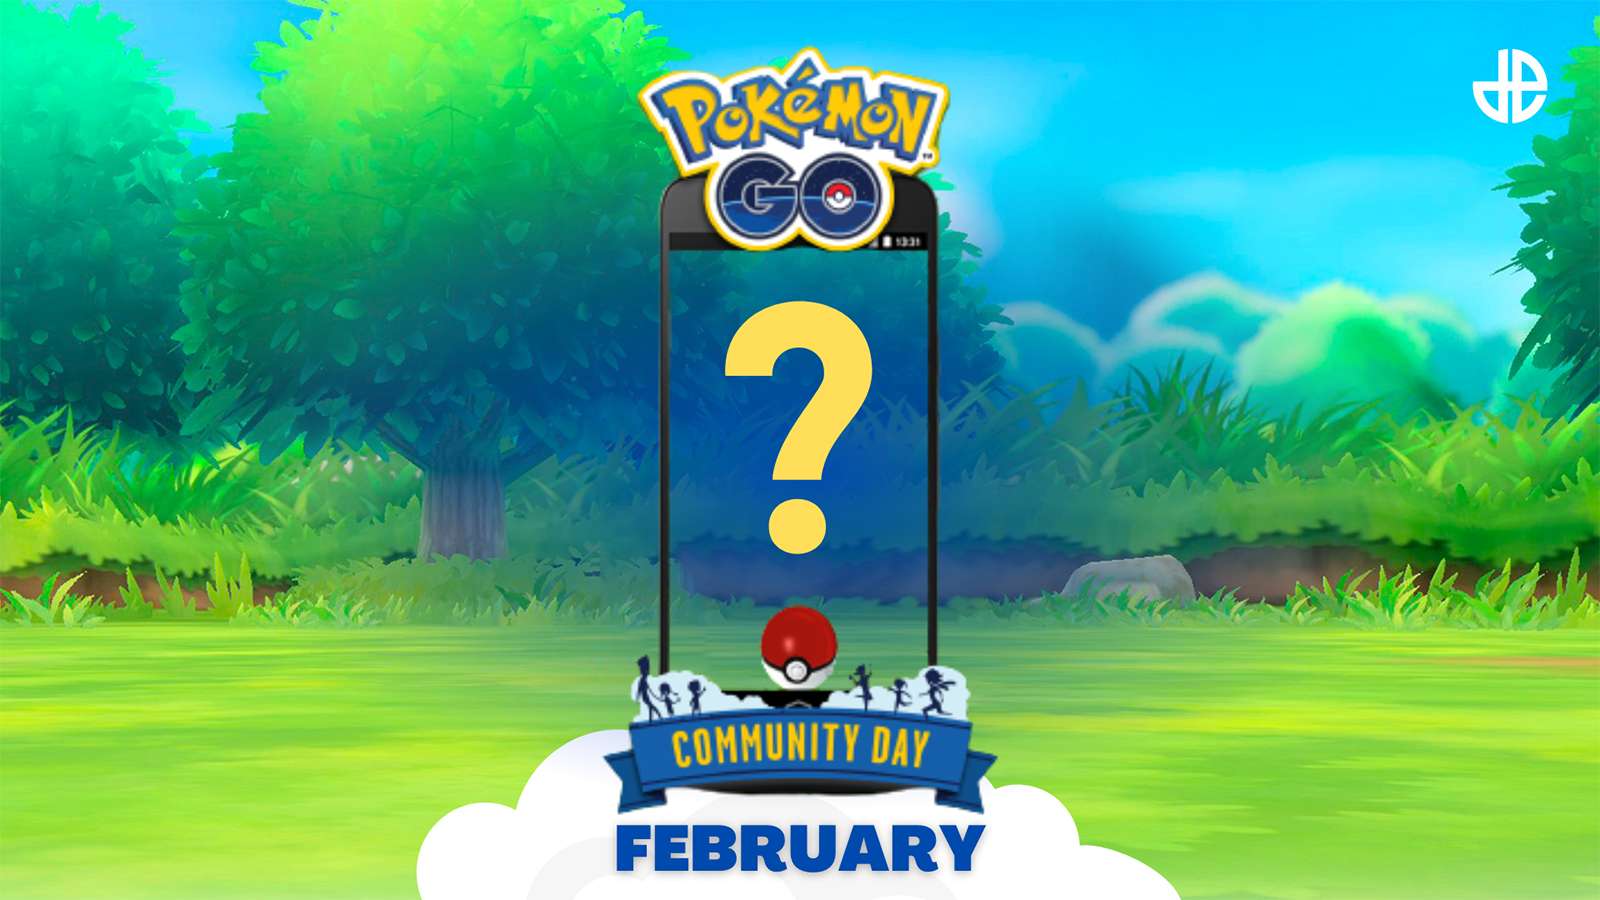 A poster for the February Community Day in Pokemon Go